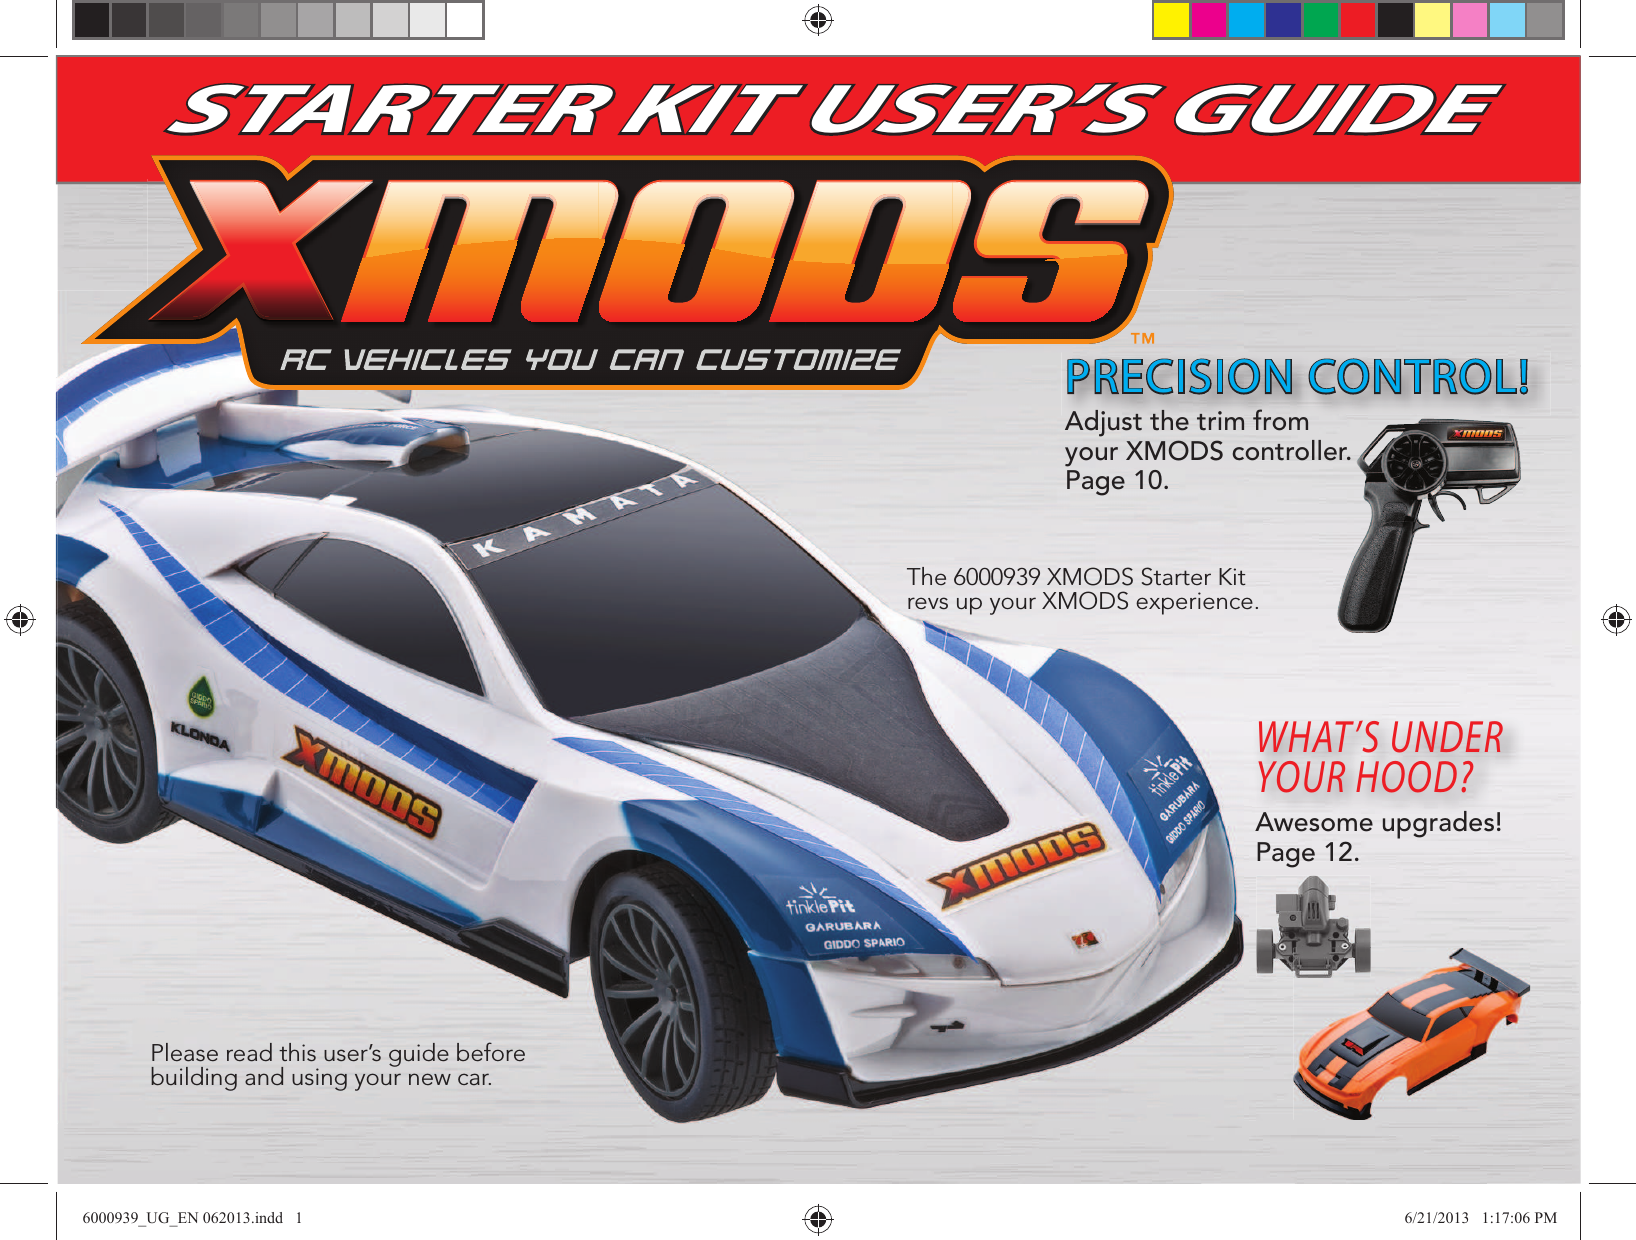 STARTER KIT USER’S GUIDEThe 6000939 XMODS Starter Kit revs up your XMODS experience.Please read this user’s guide before building and using your new car.PRECISION CONTROL!WHAT’S UNDER YOUR HOOD?Awesome upgrades! Page 12.Adjust the trim from your XMODS controller. Page 10.6000939_UG_EN 062013.indd   1 6/21/2013   1:17:06 PM